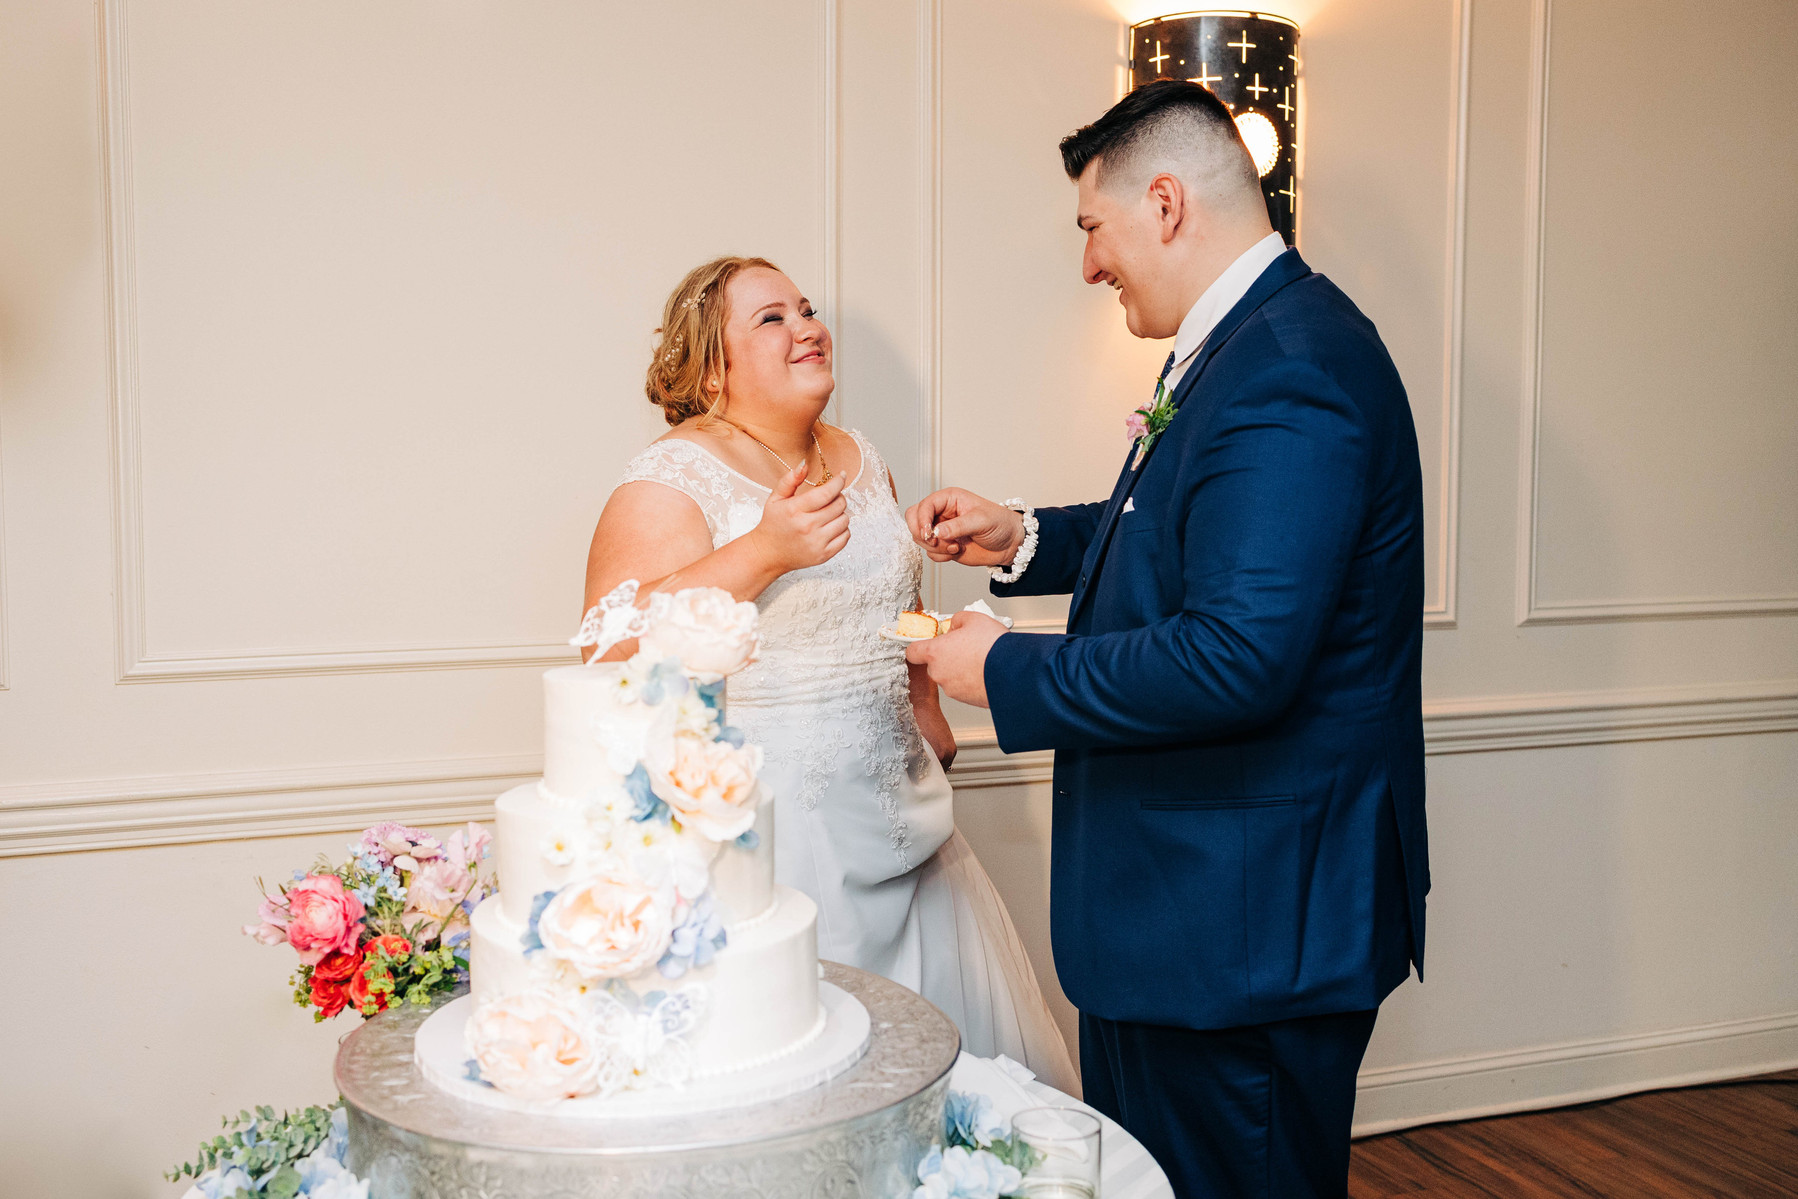 bride and groom cutting their cake during their wedding reception at the farmhouse at people's light theater in malvern pennsylvania